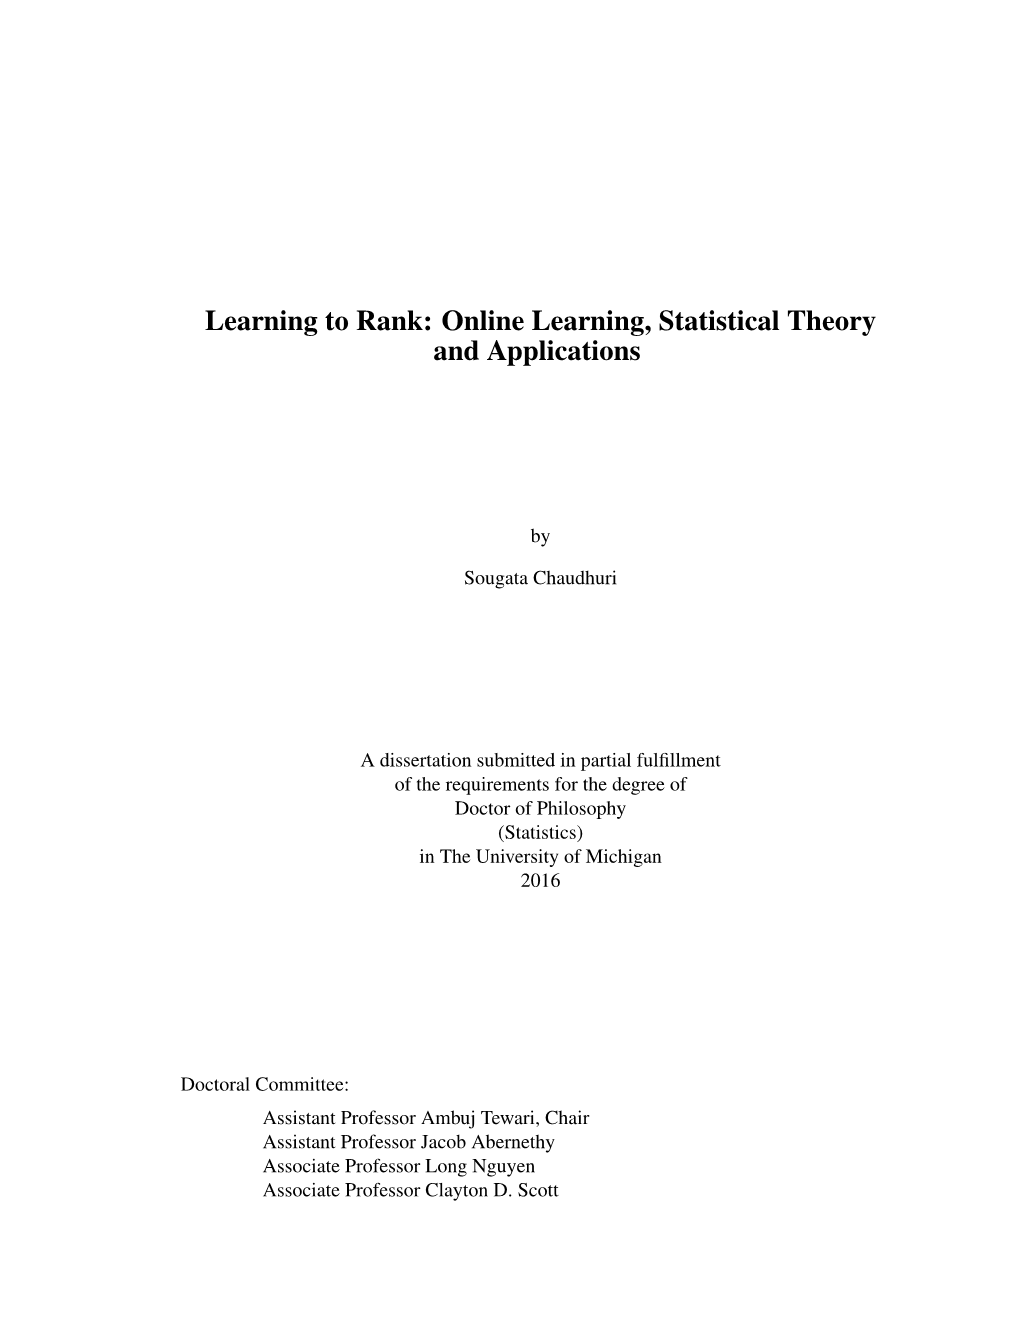 Learning to Rank: Online Learning, Statistical Theory and Applications